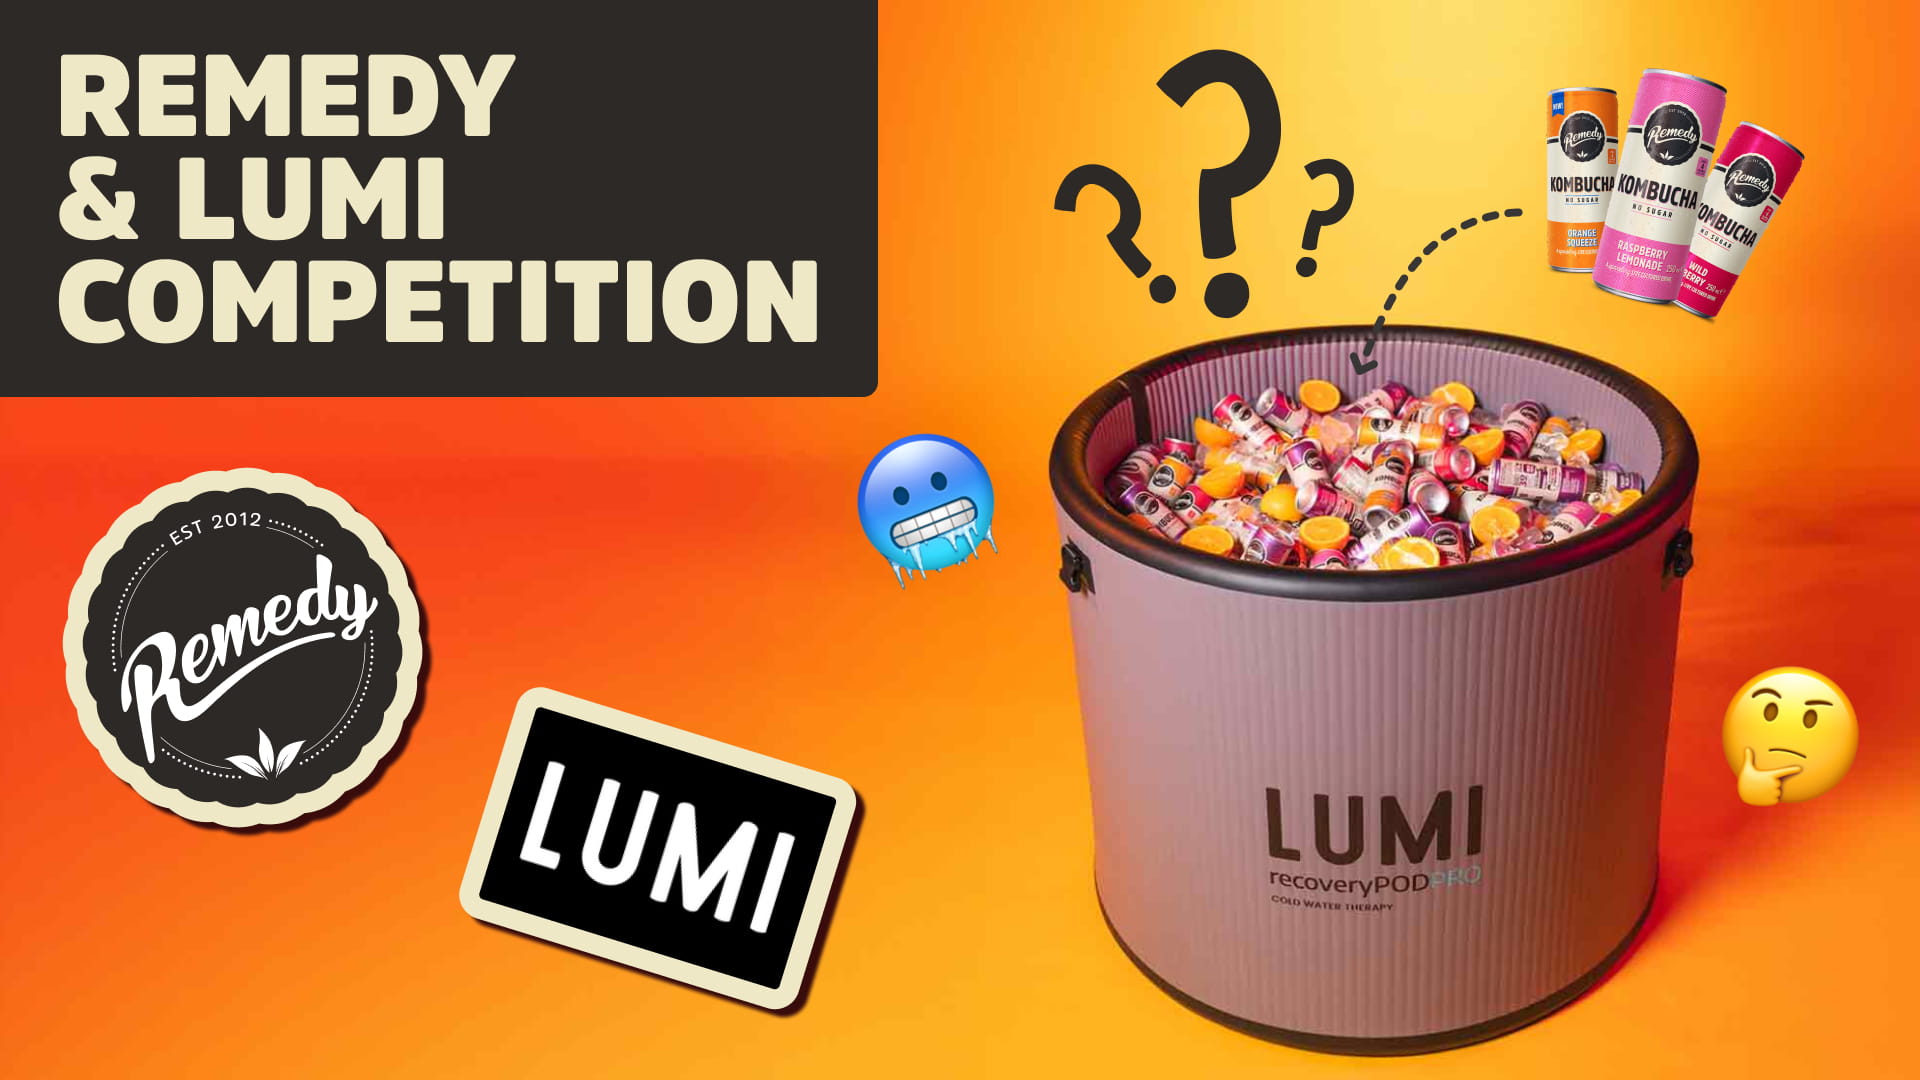 Remedy & Lumi Competition Header Image